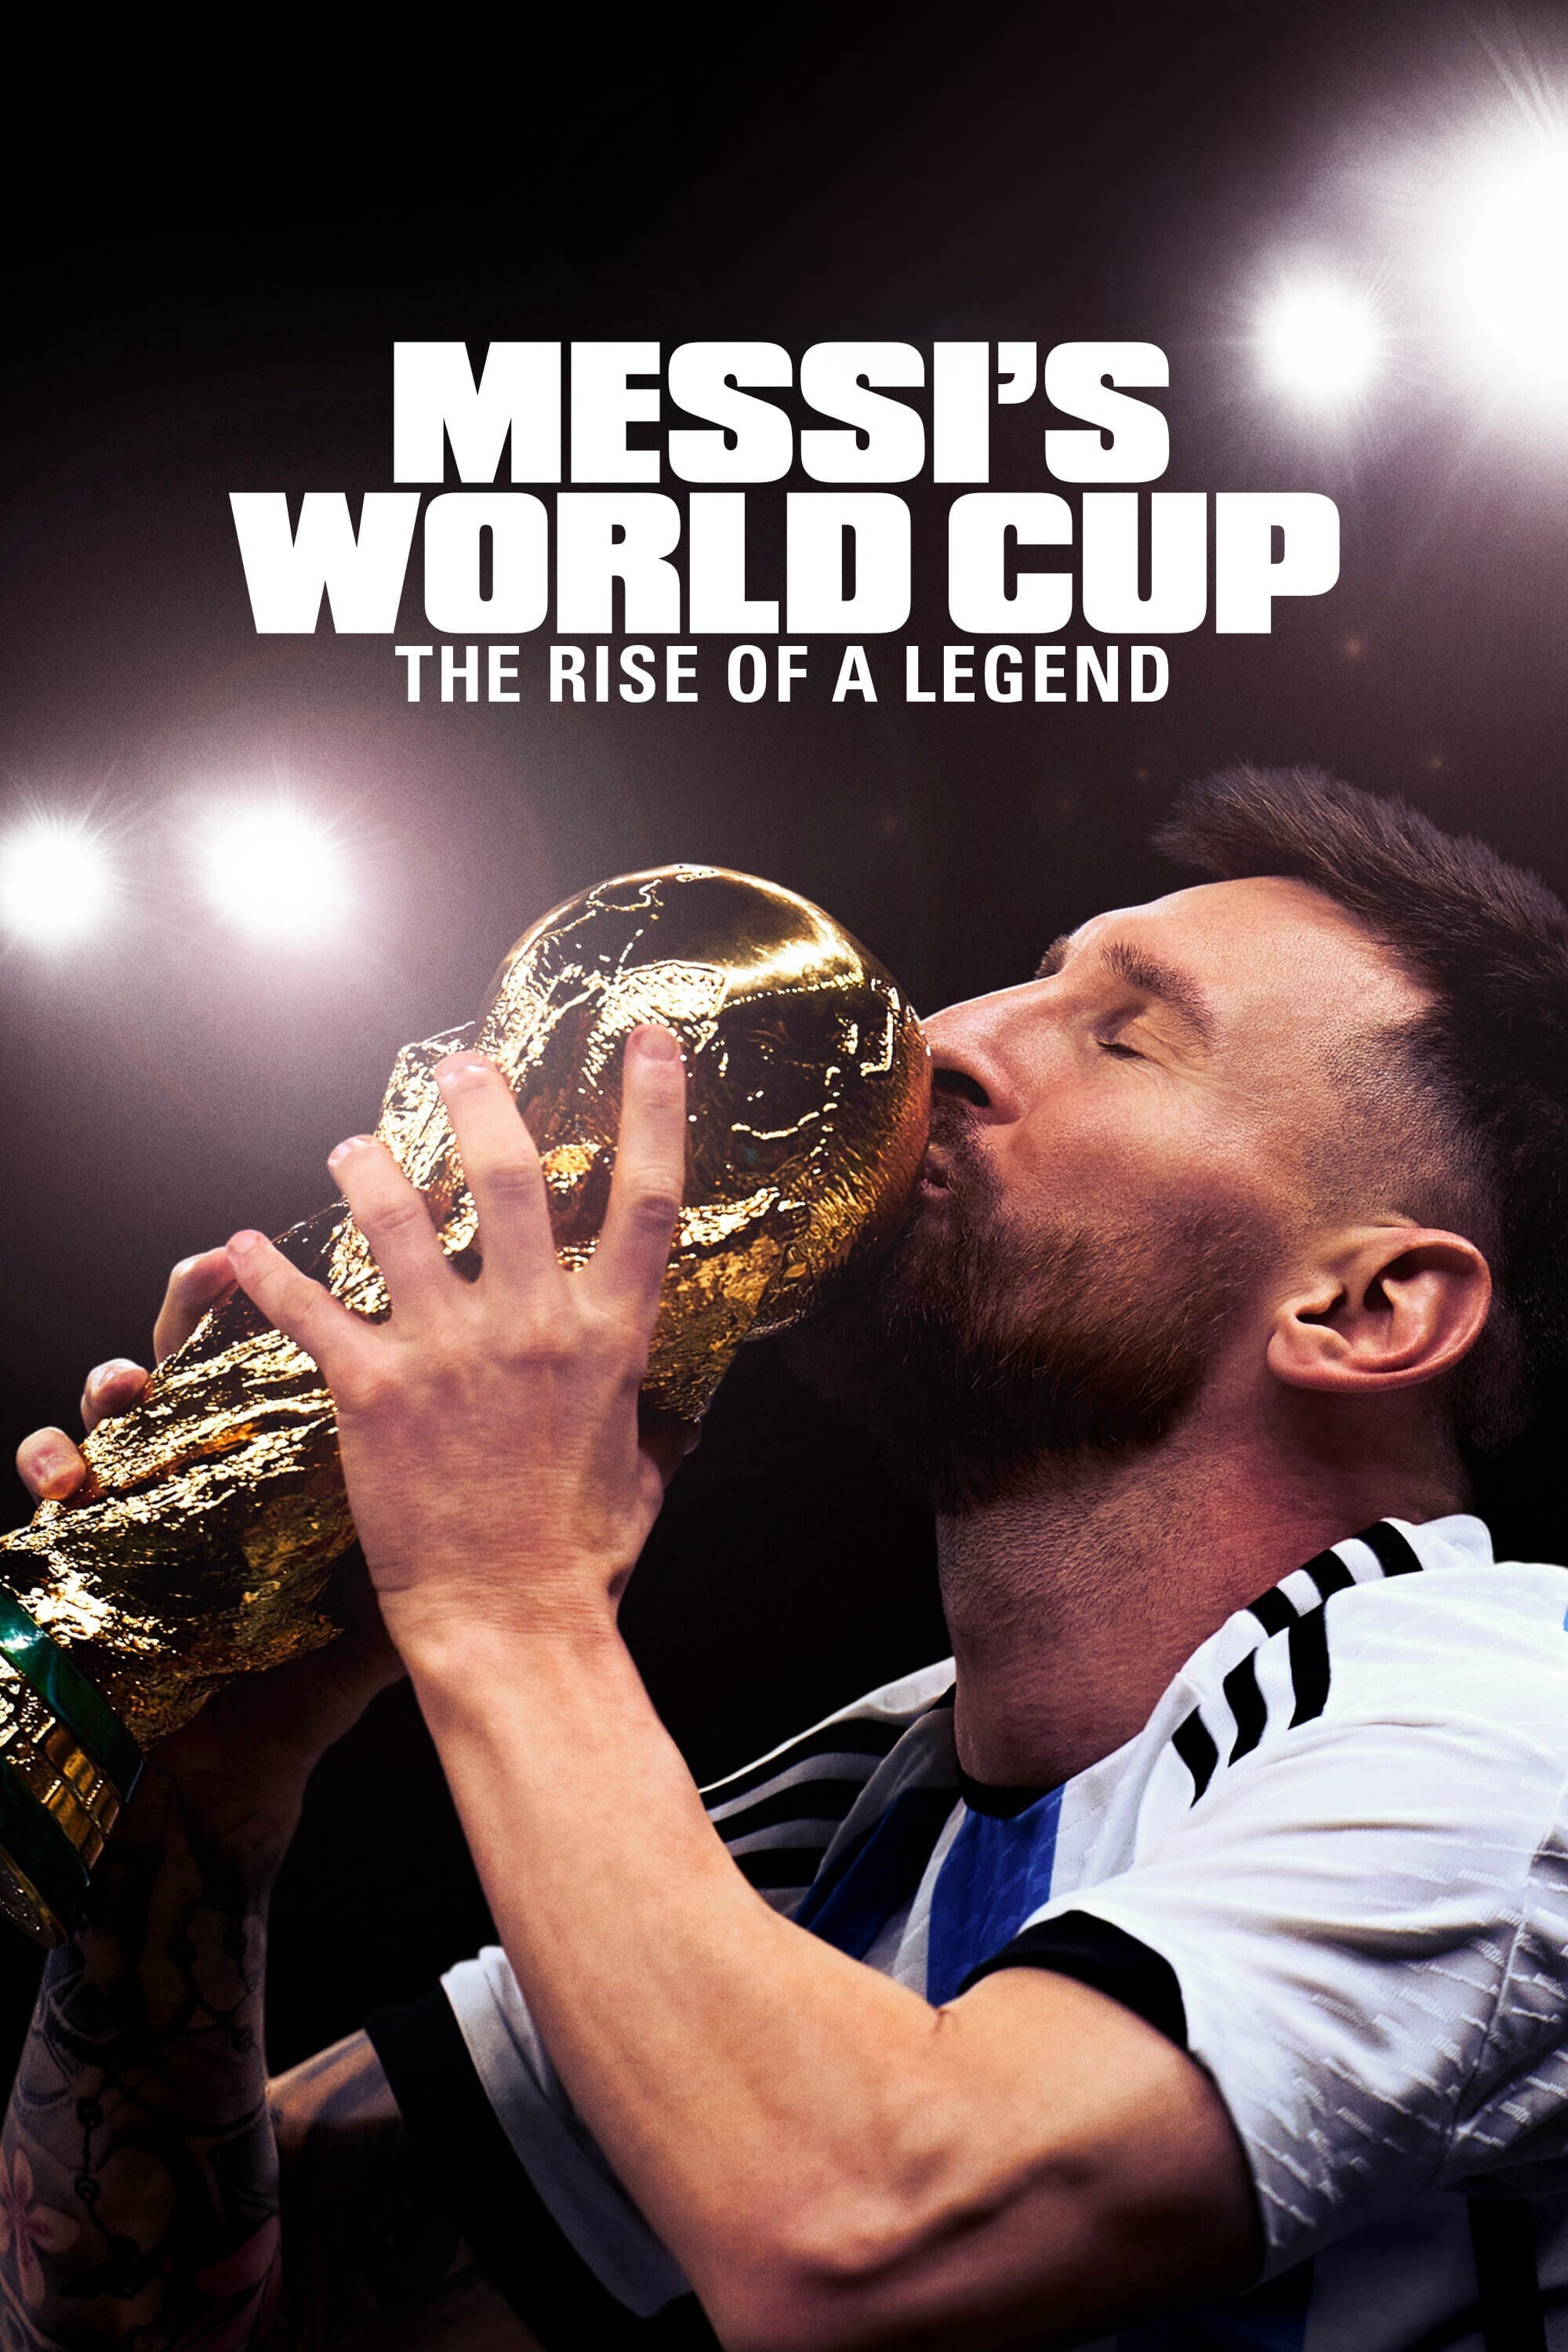 Kỳ World Cup Của Messi: Huyền Thoại Tỏa Sáng - Messi's World Cup: The Rise of a Legend - Kỳ World Cup Của Messi: Huyền Thoại Tỏa Sáng - Messi's World Cup: The Rise of a Legend